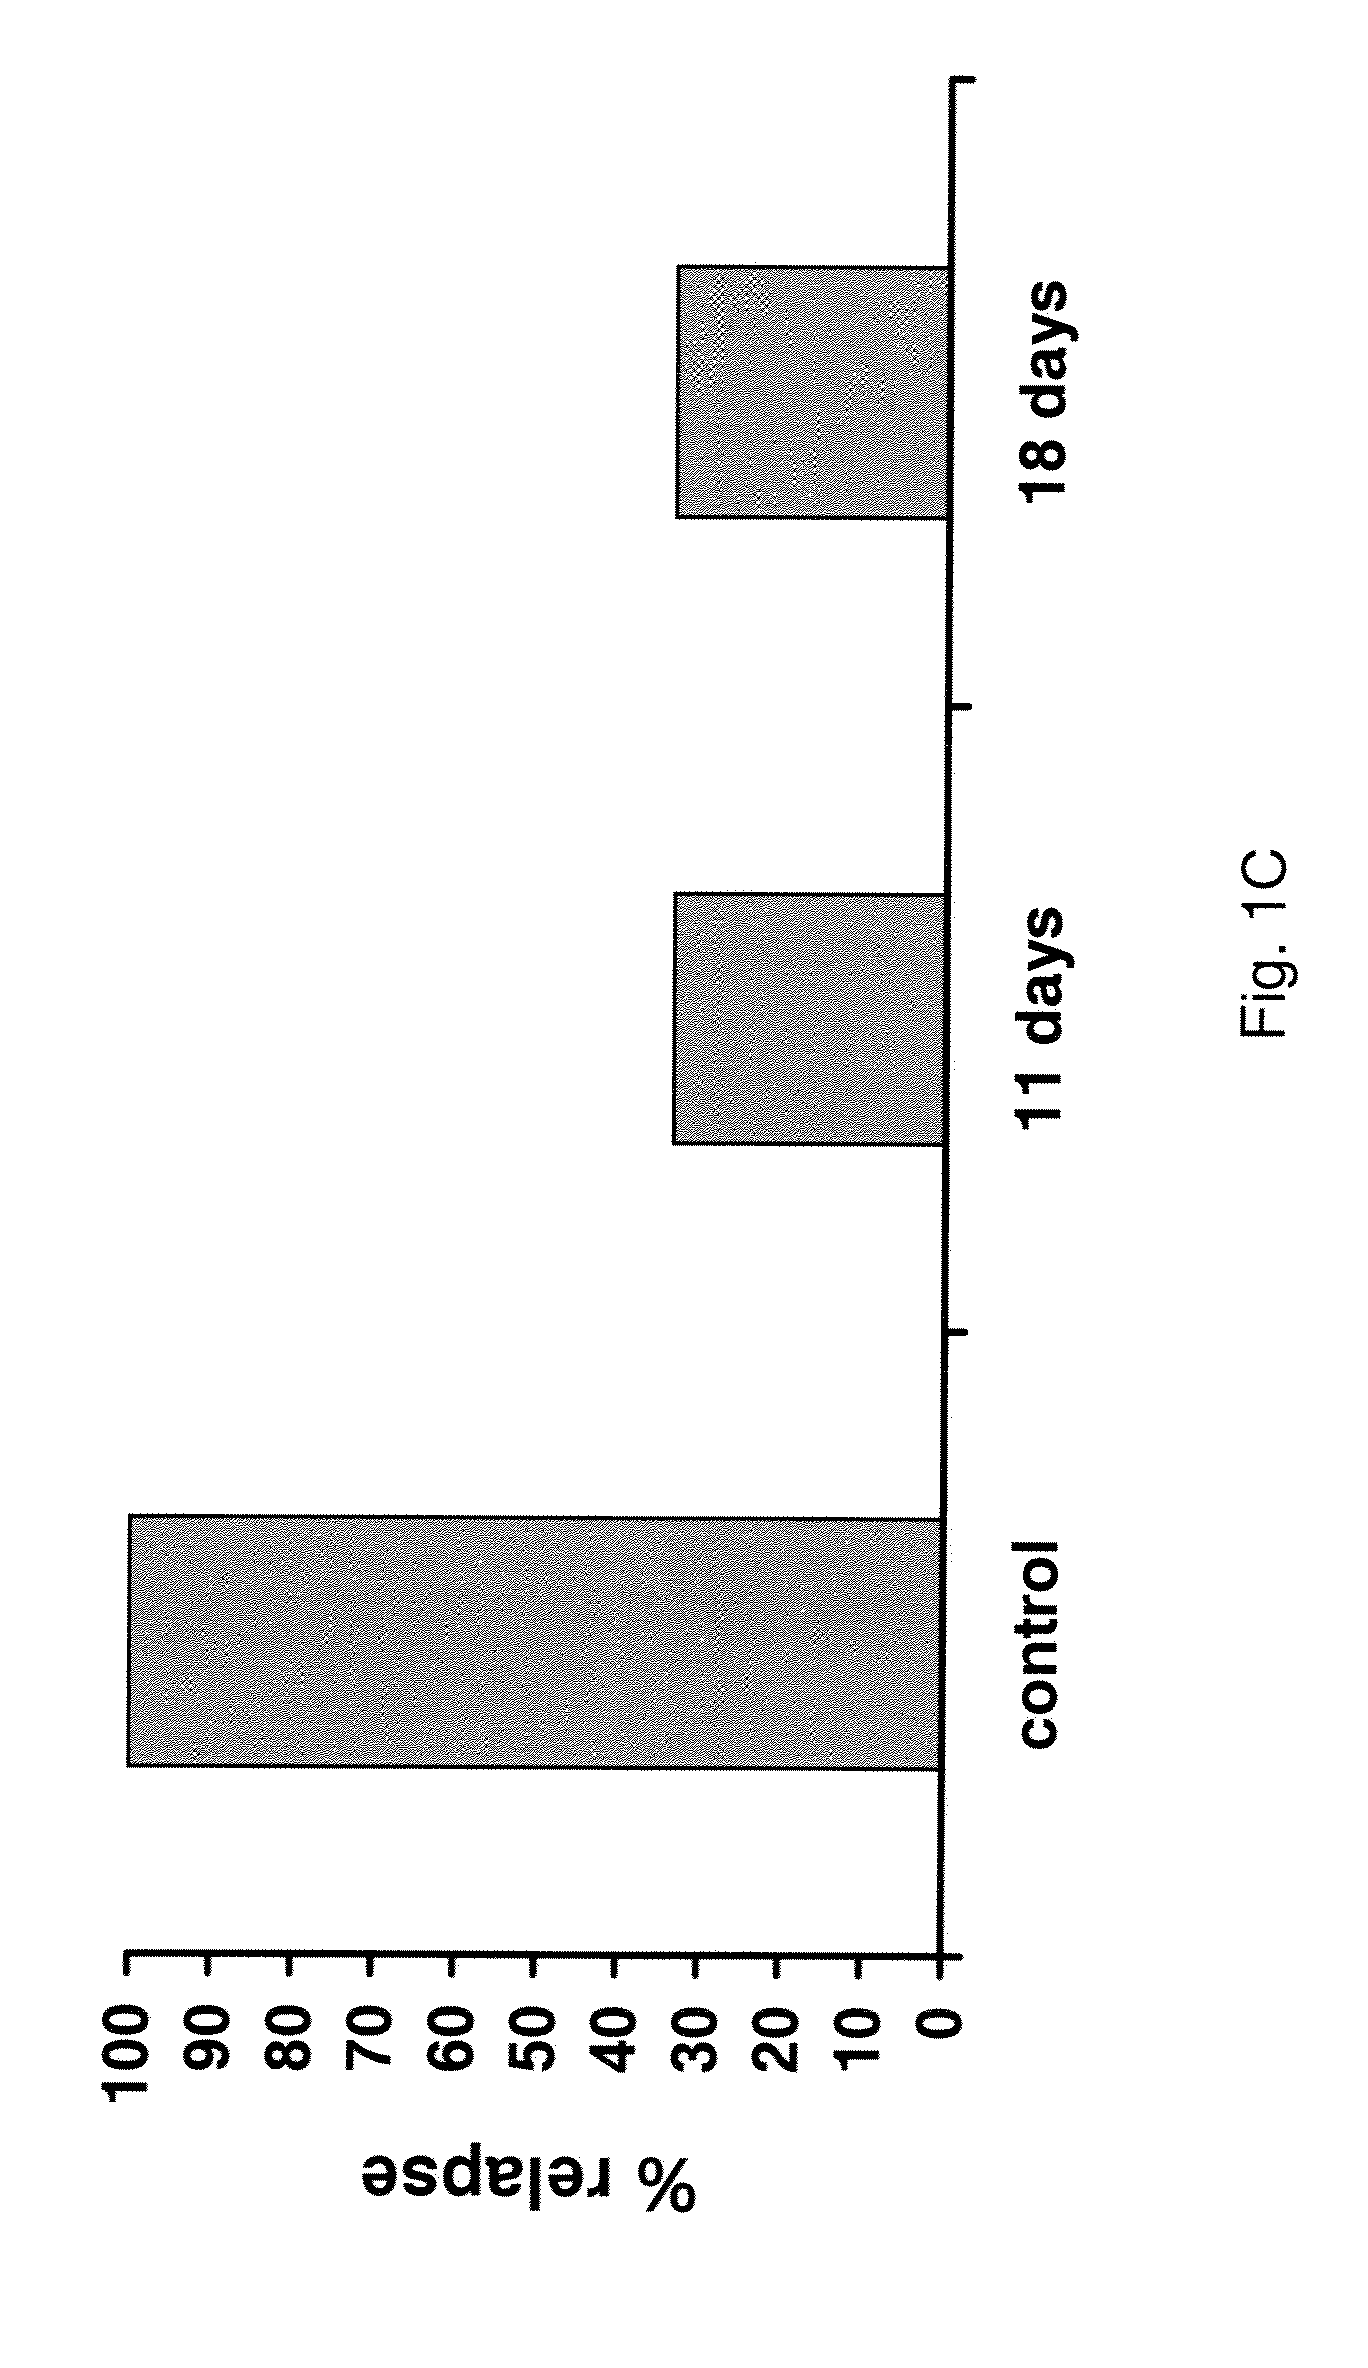 Combinations of receptor tyrosine kinase inhibitor with an a1-acidic glycoprotein binding compound